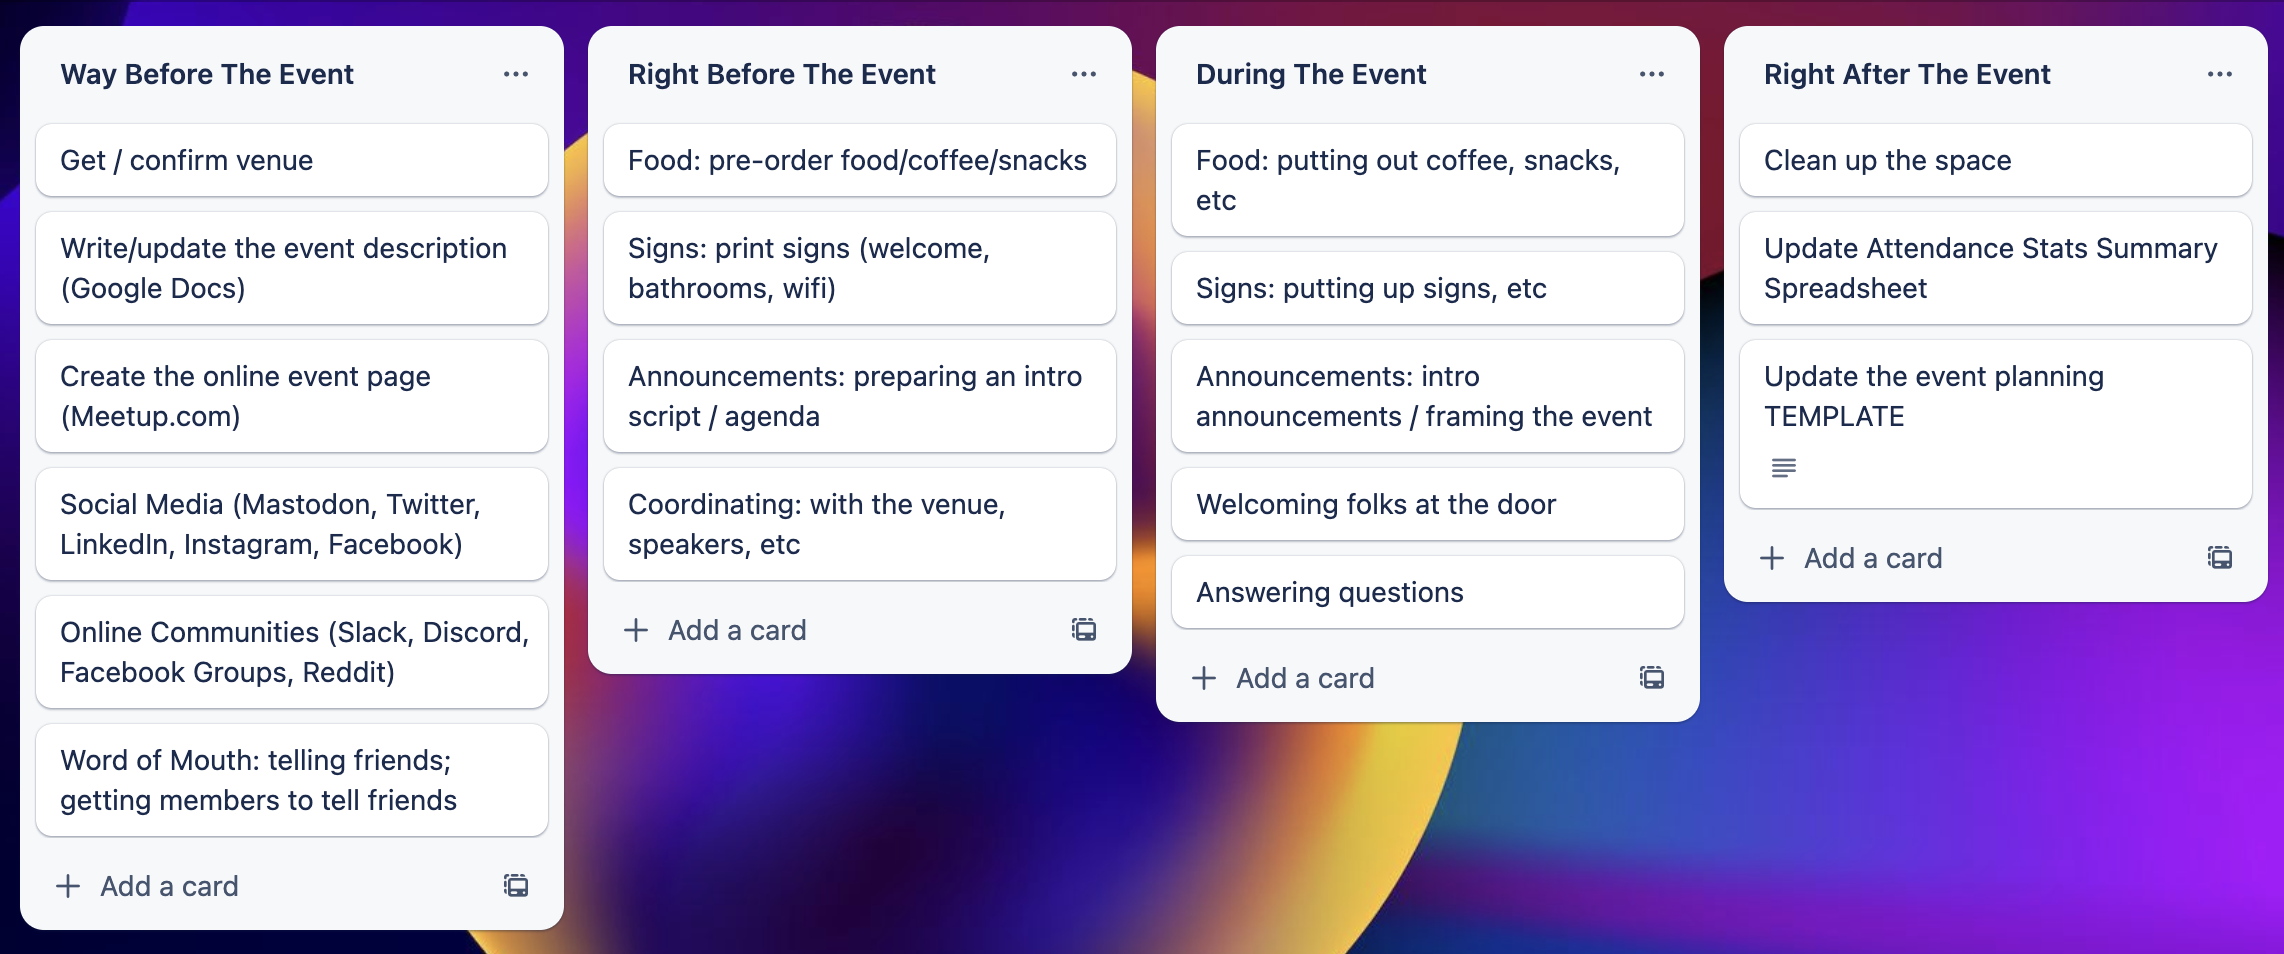 Trello board with event tasks in columns: way before the event, right before the event, during the event, after the event